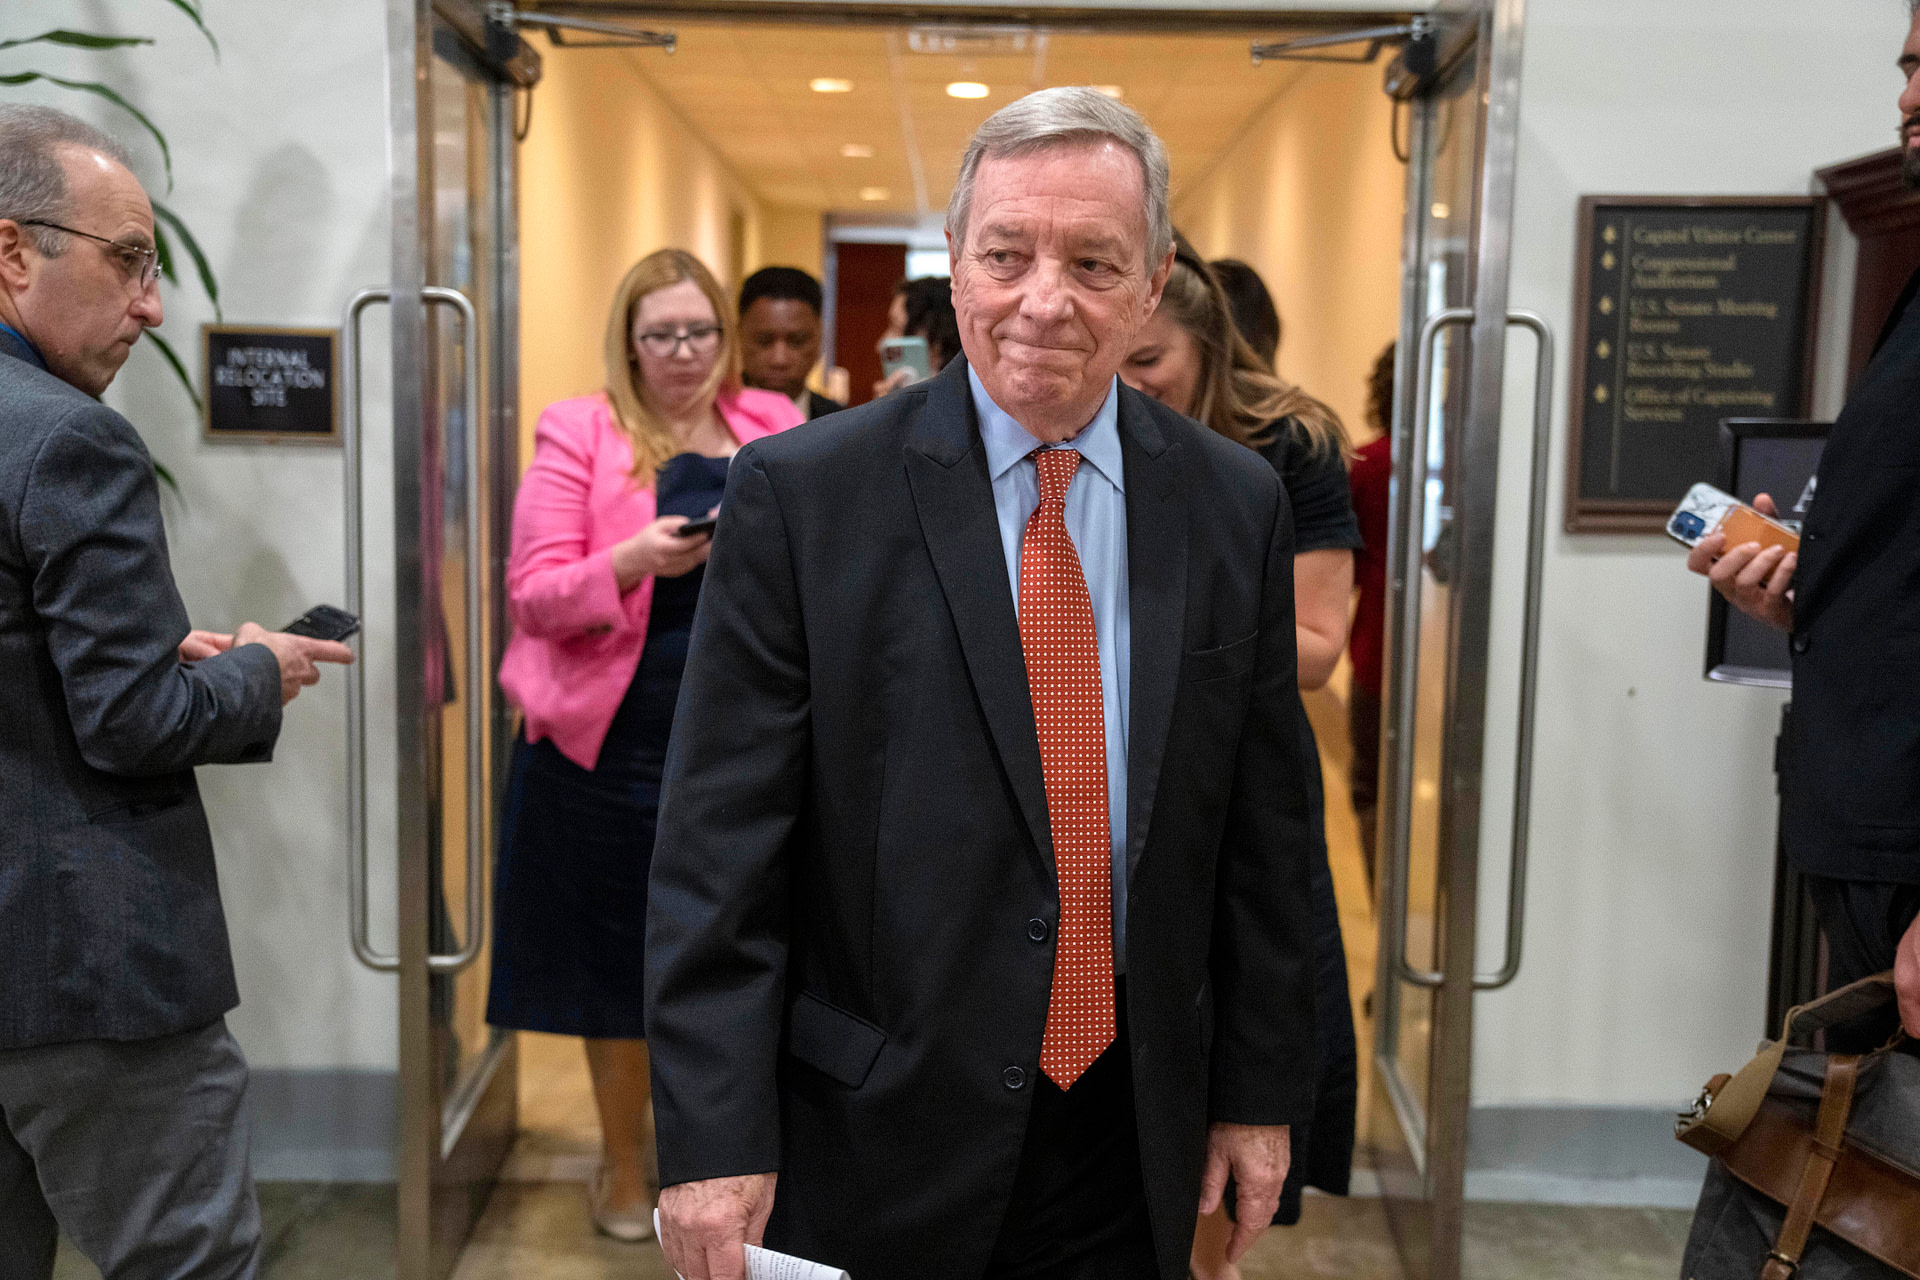 Chief justice must implement strong ethics code, Sen. Dick Durbin says